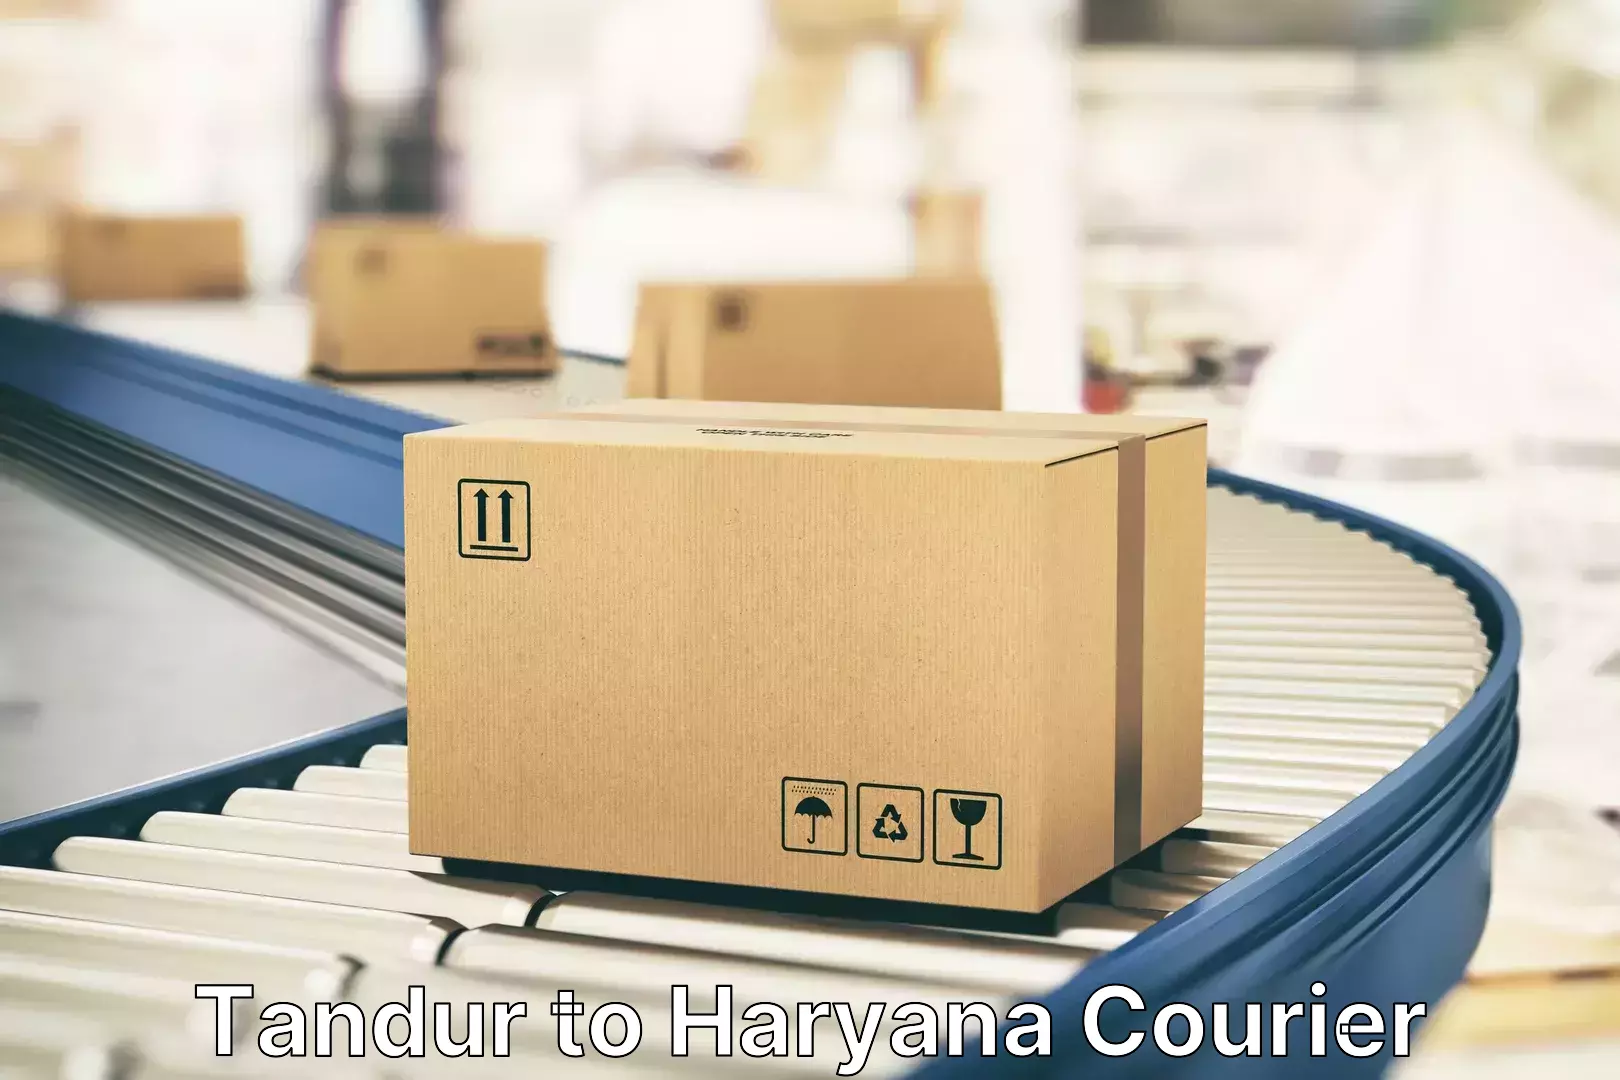 Baggage delivery management Tandur to NCR Haryana